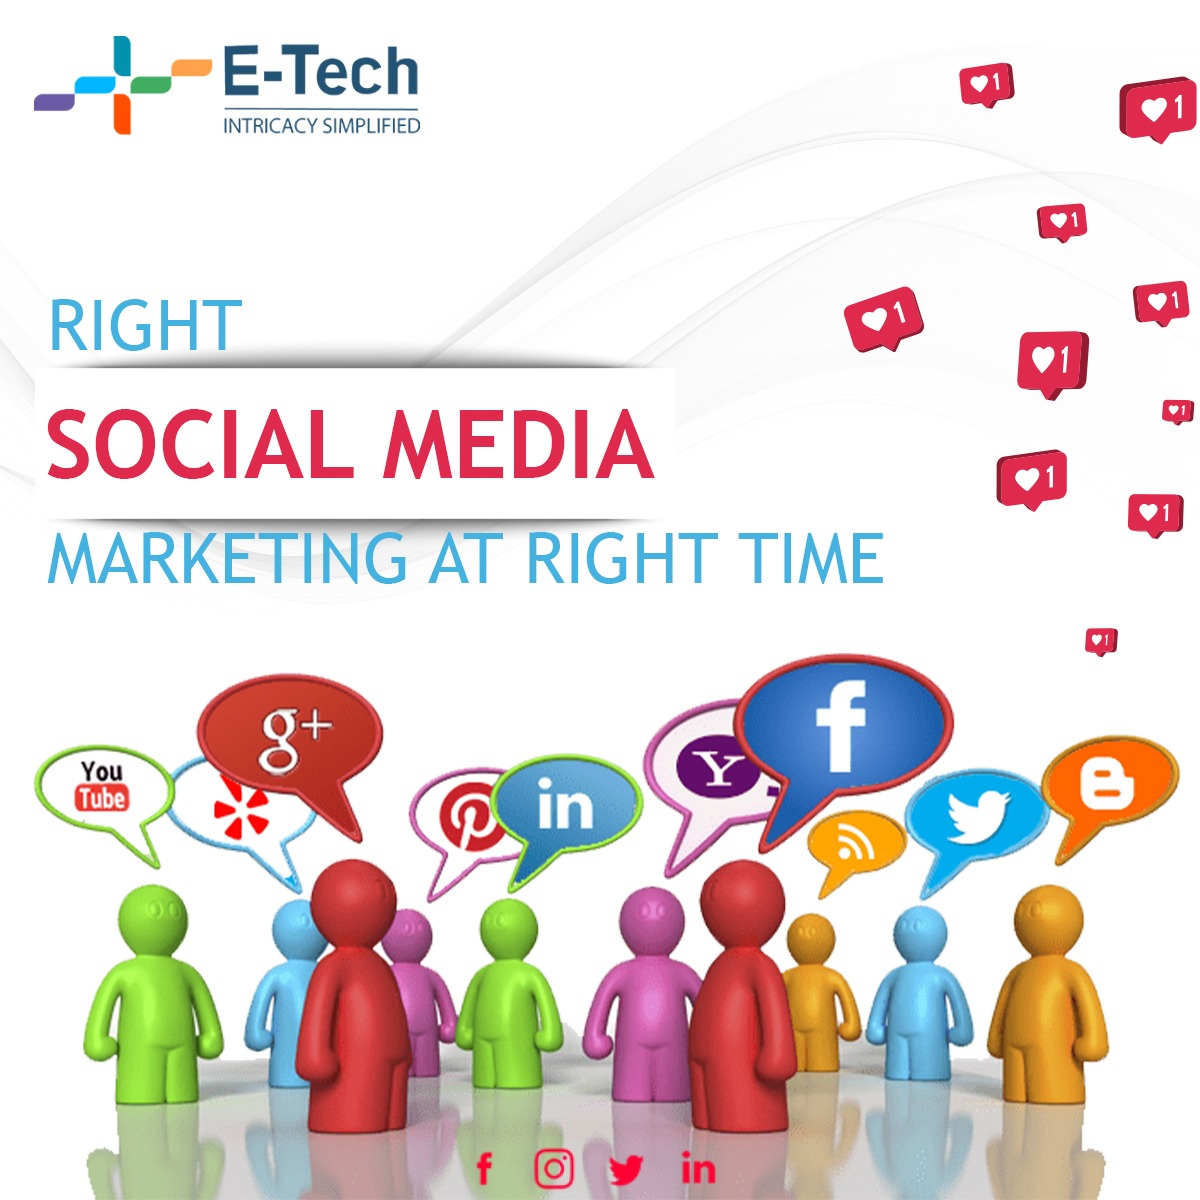 Don't just post blindly; let us help you position yourself as an industry leader in the ever-changing world of digital marketing. Get started on a tailored approach with E-Tech Marketing today!
#digitalmarketing #socialmedia #contentmarketing #socialmediamarketin